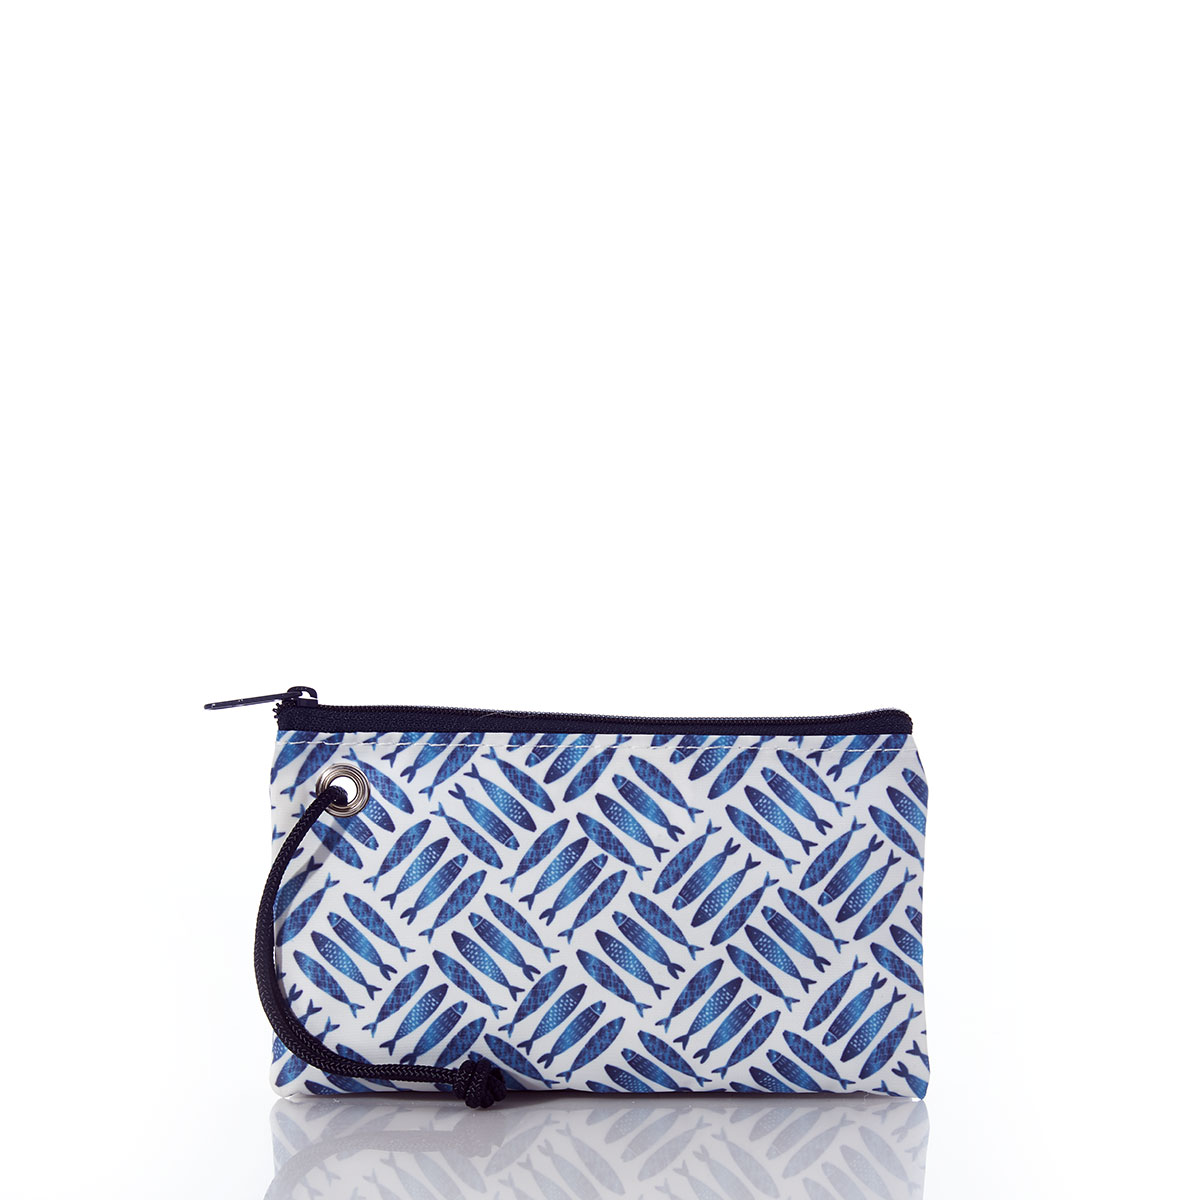 back view of criss cross print of blue school of fish on recycled sail cloth wristlet with navy zipper and wristlet strap